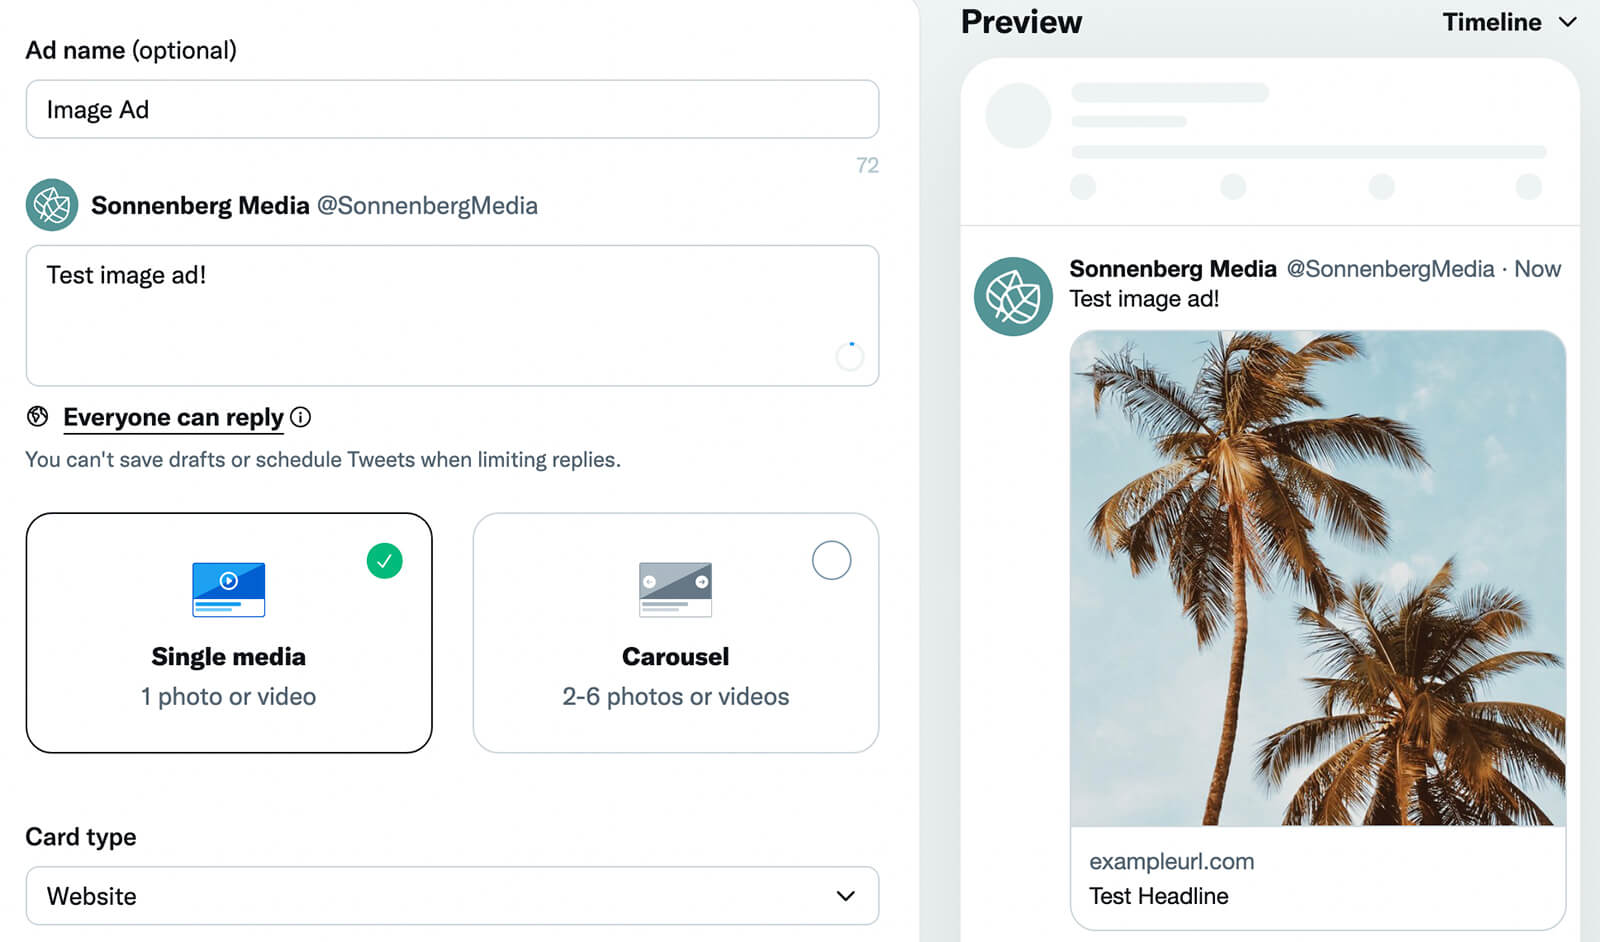 how-to-run-twitter-ads-2022-promoted-image-sonnenberg-media-step-4